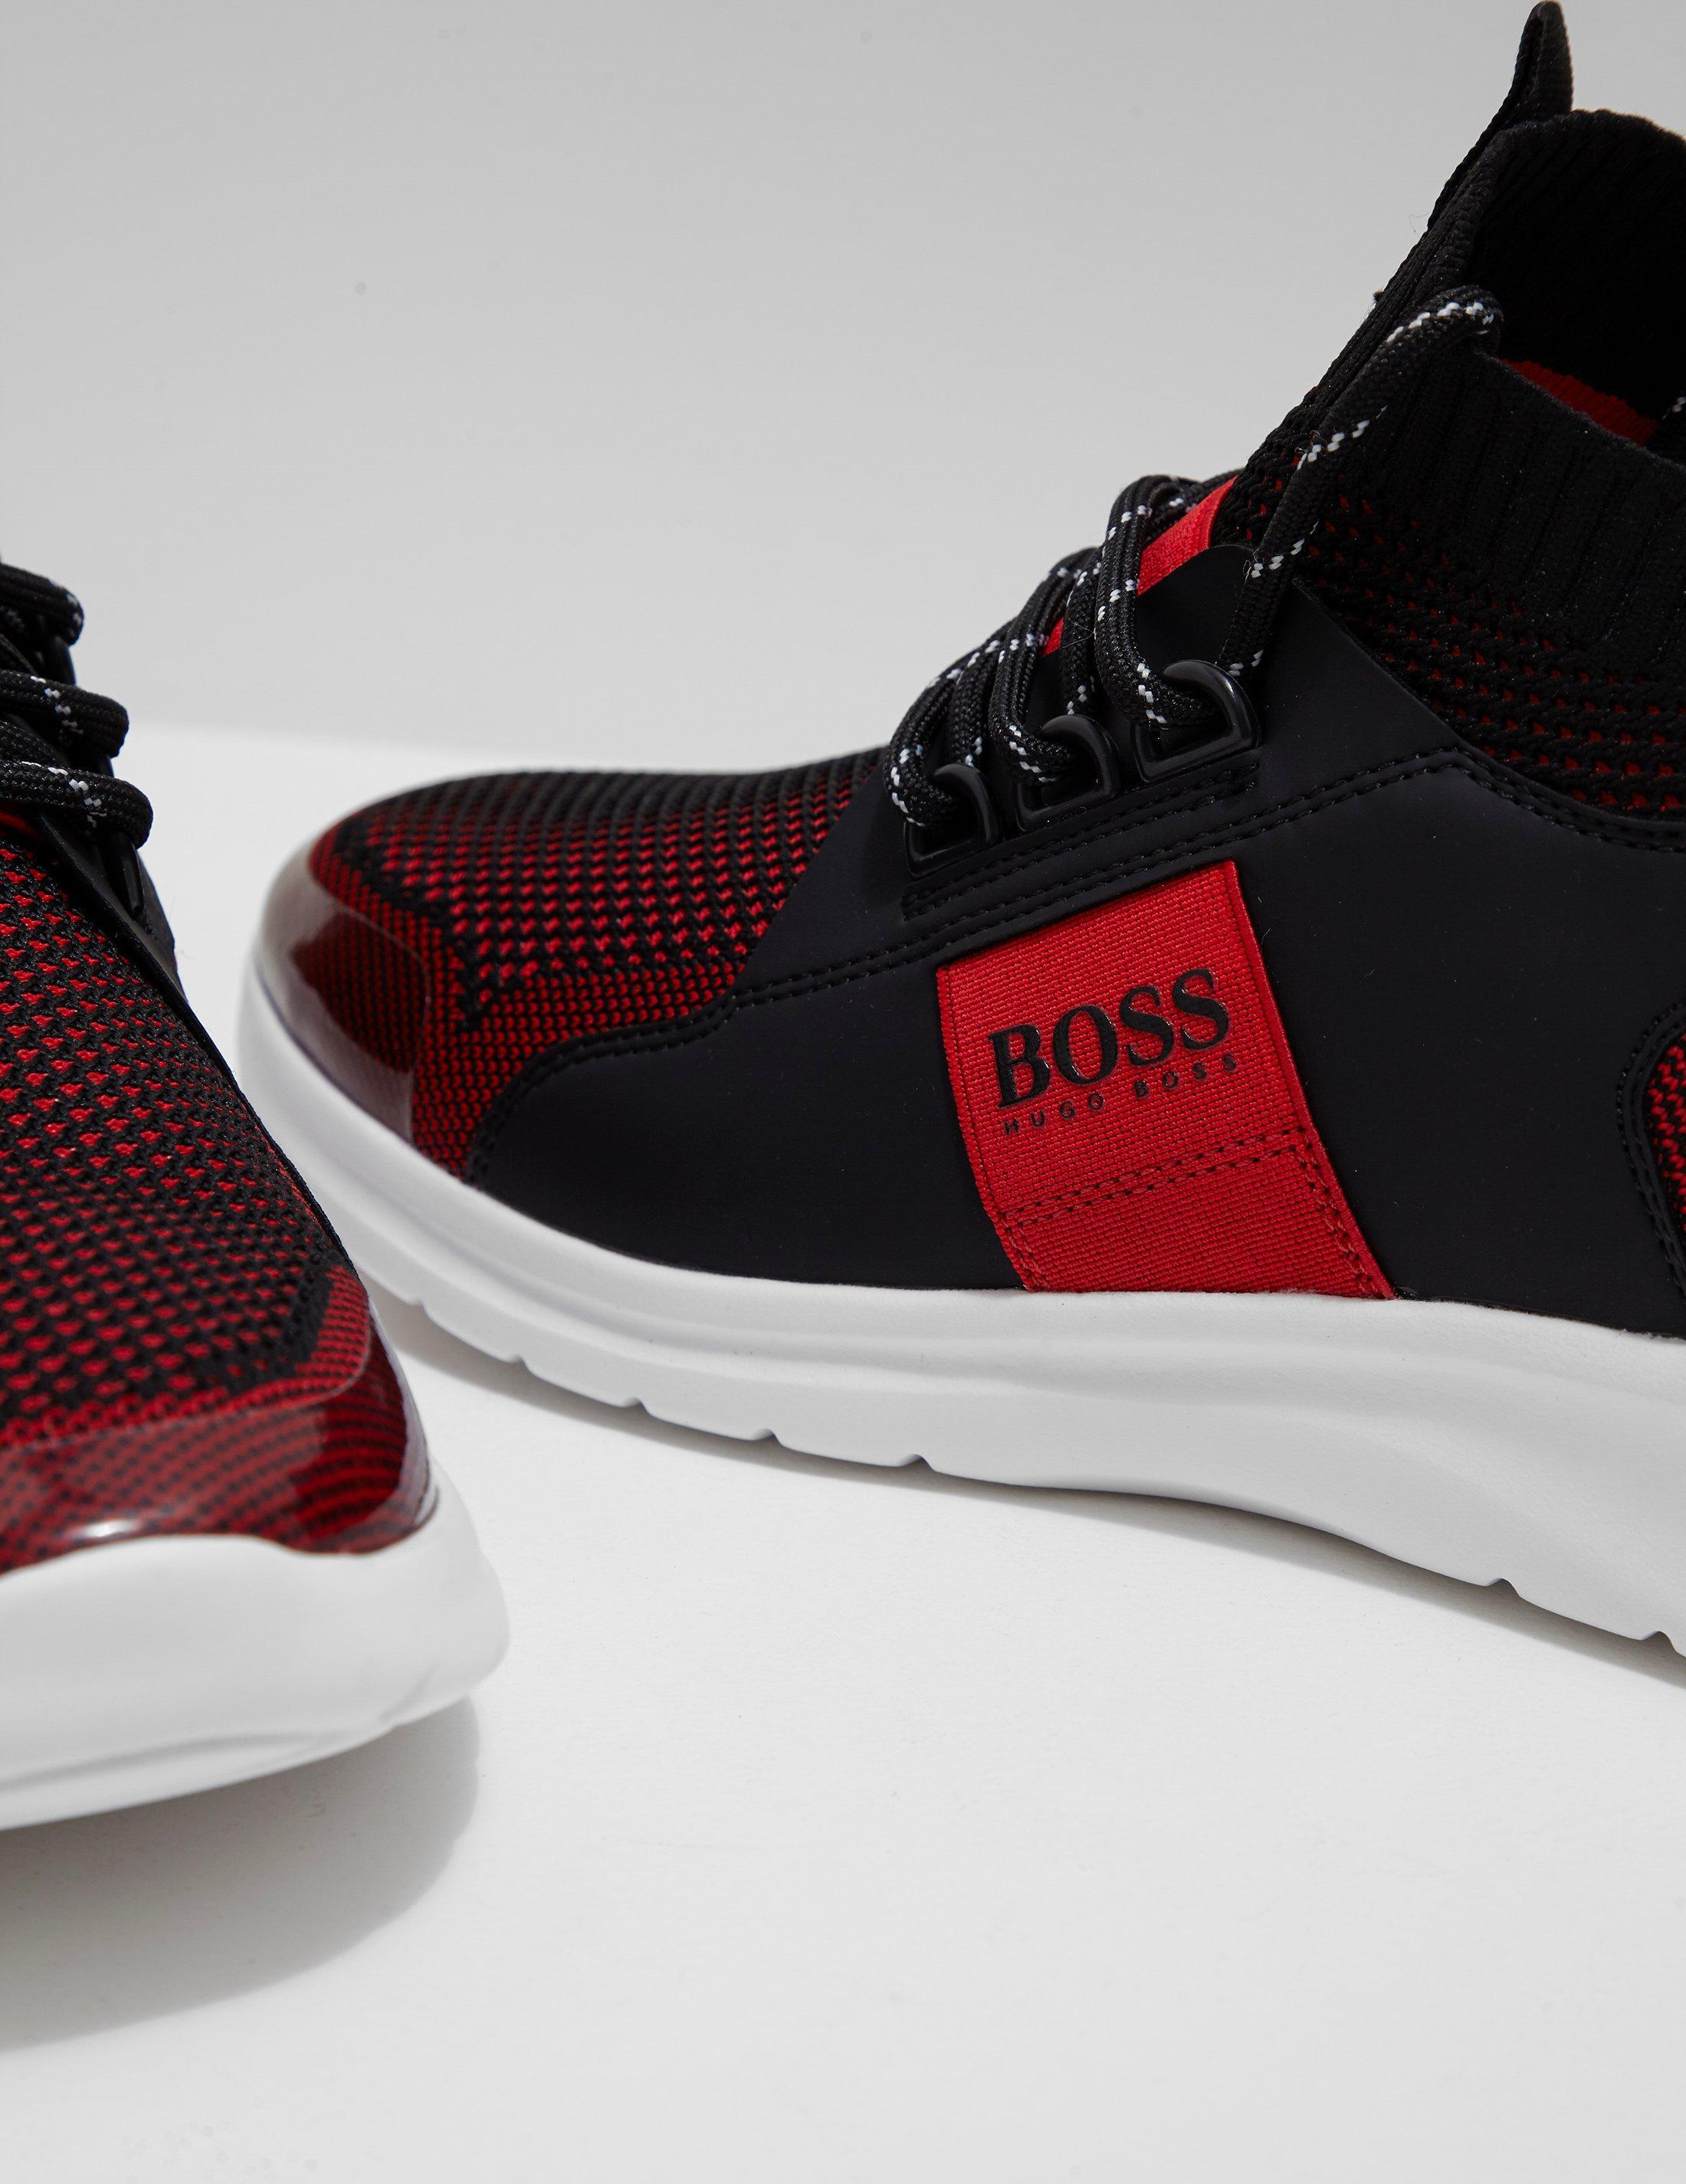 Hugo Boss Trainers Red Store, 53% OFF | www.museodeltaantico.com